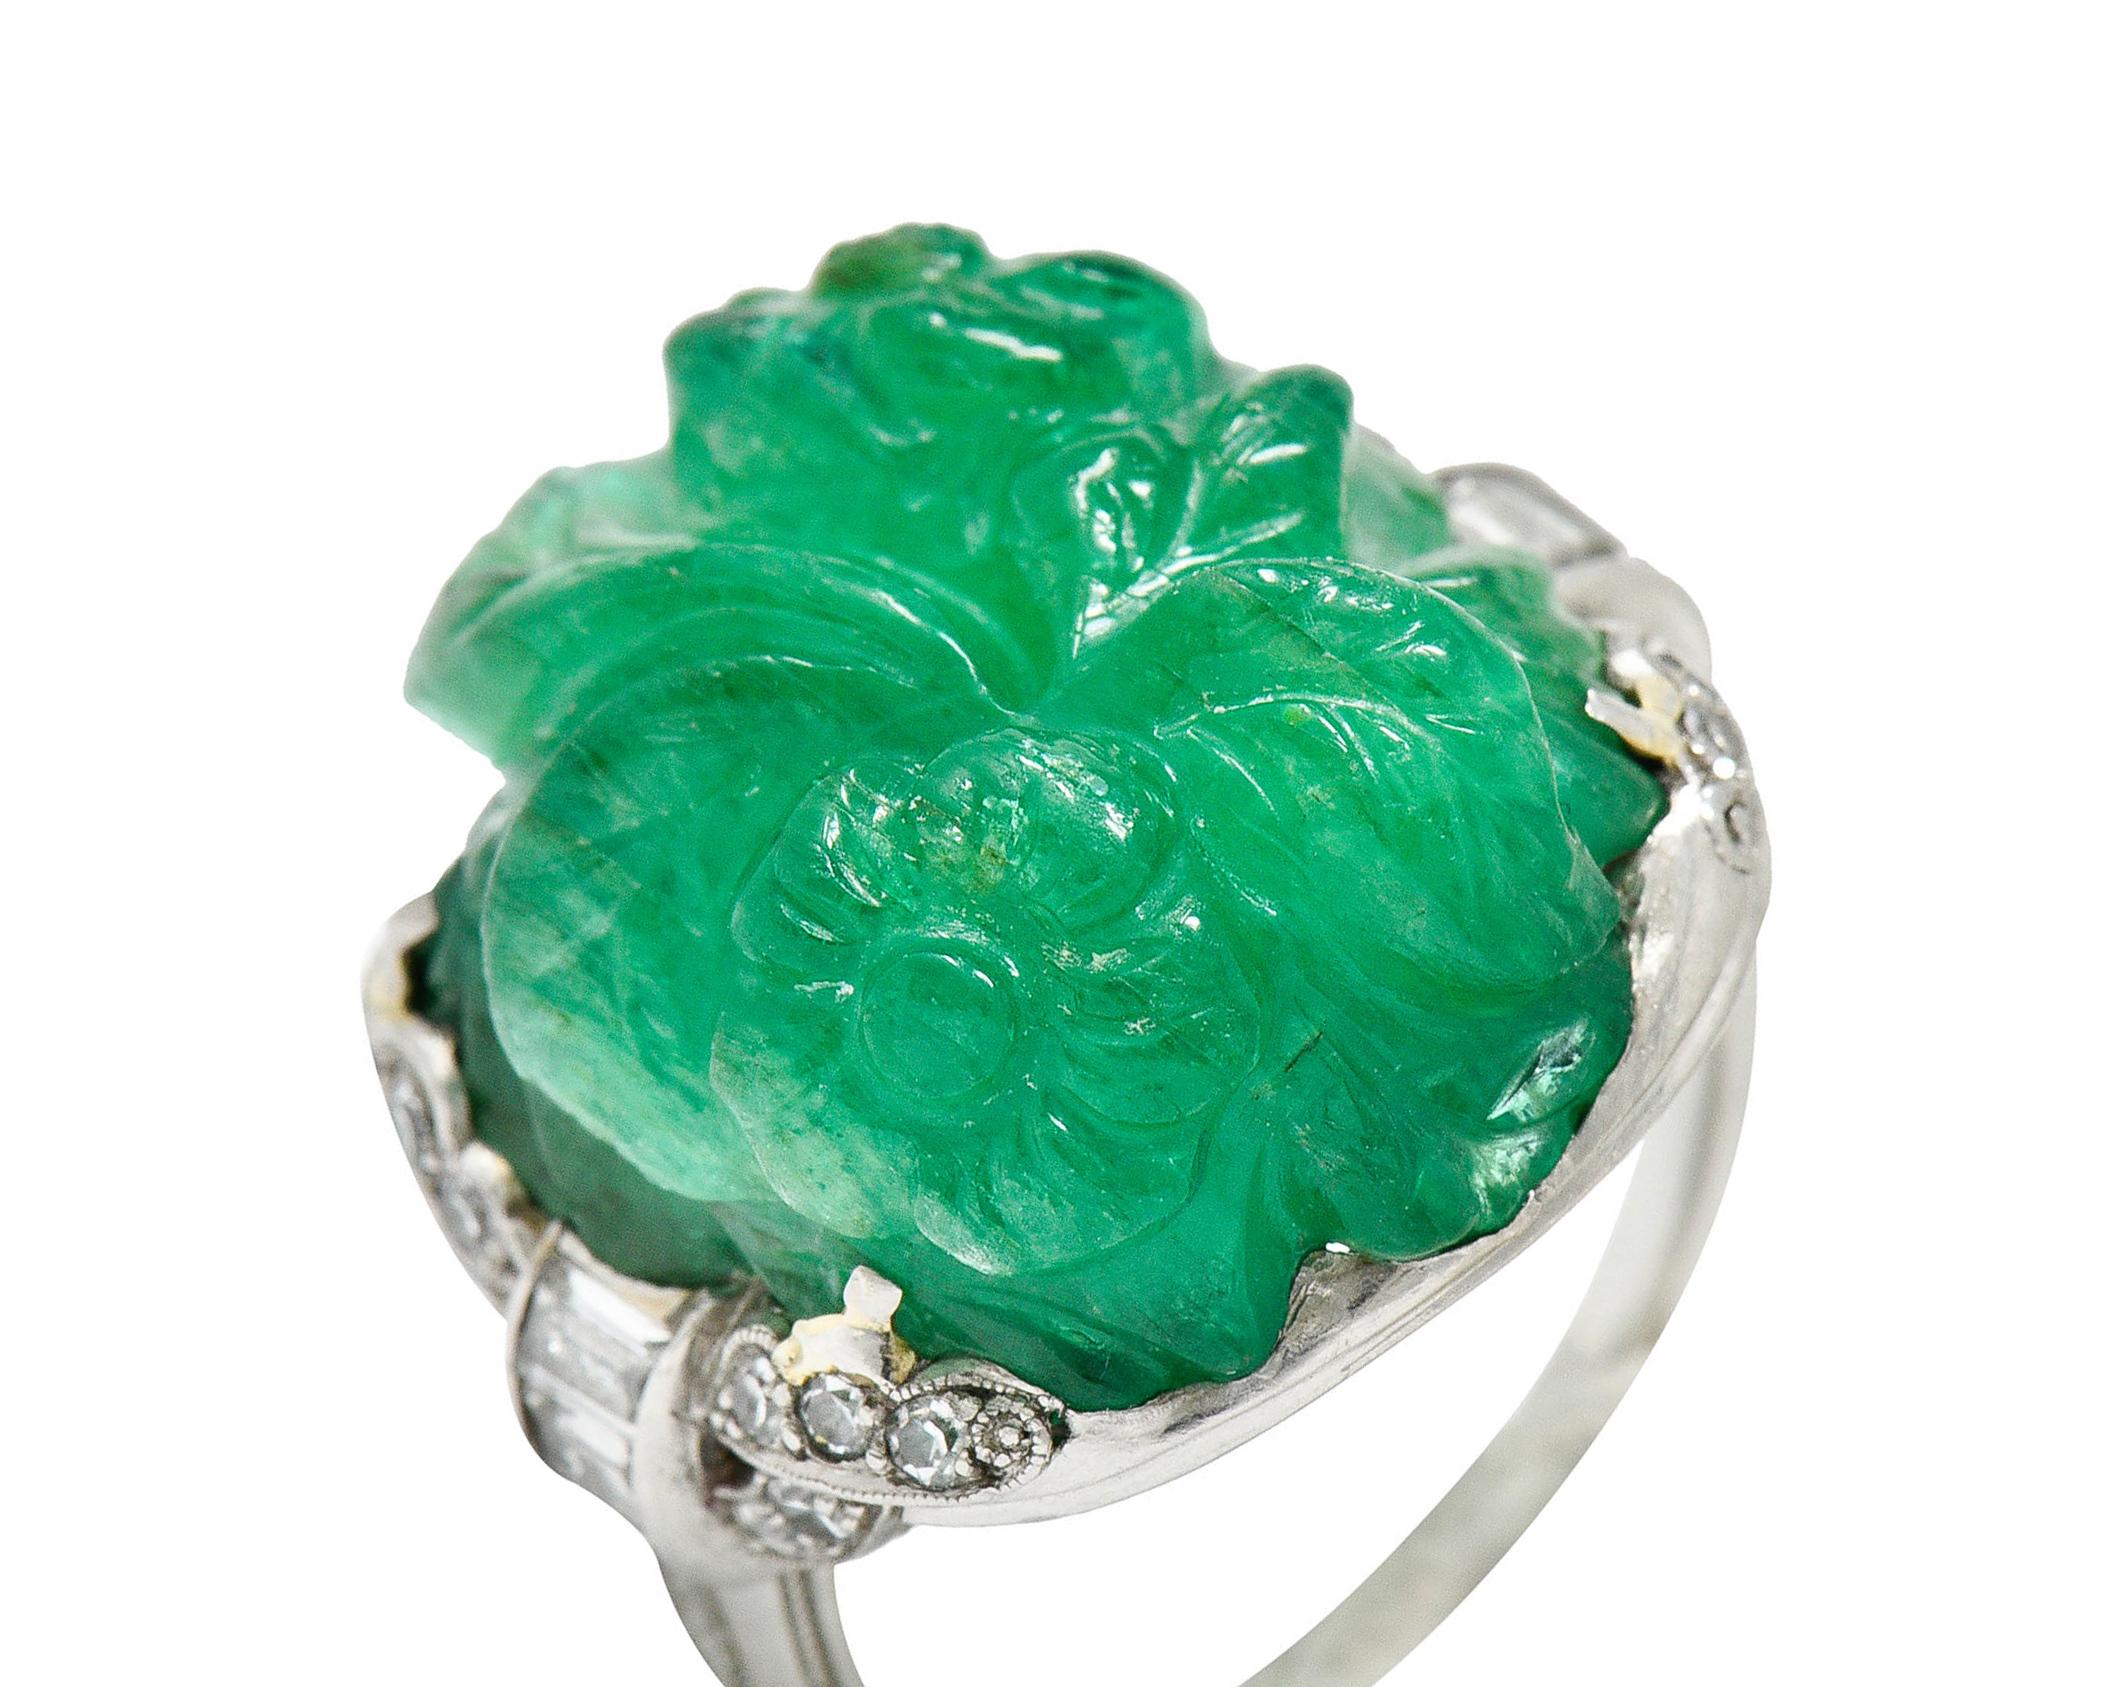 Mixed Cut Art Deco 15.60 Carats Carved Colombian Emerald Diamond Platinum Cocktail Ring